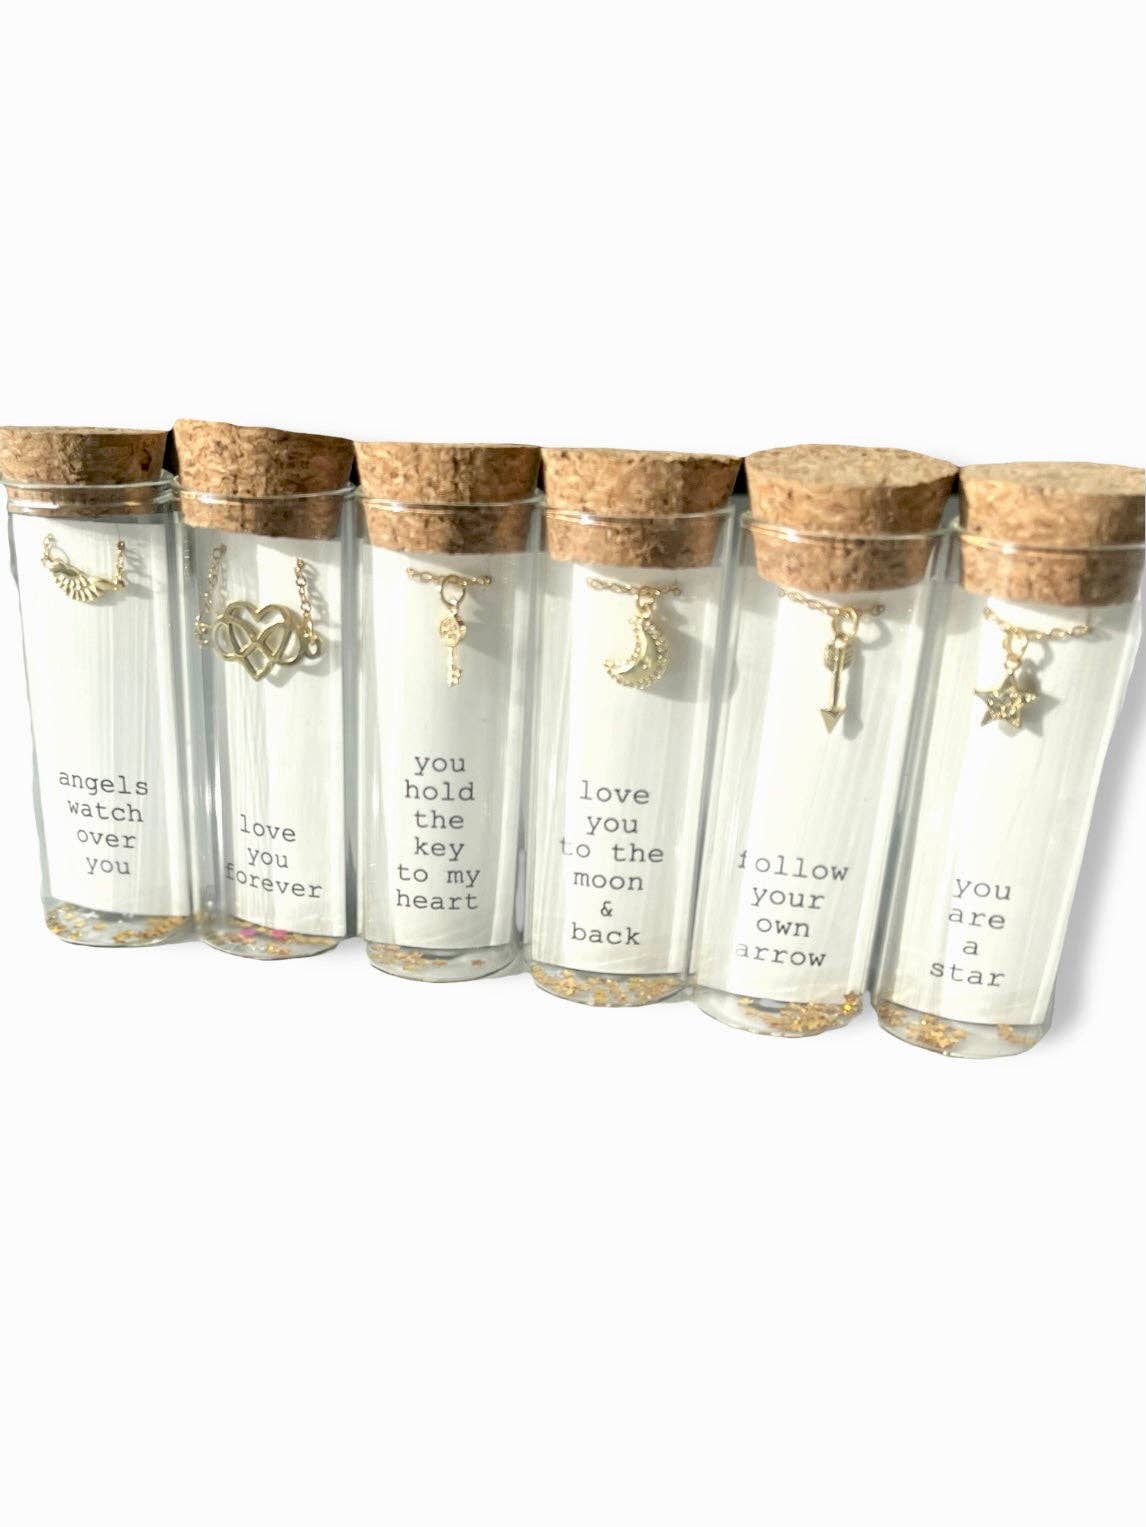 Charm necklace - in glass vials